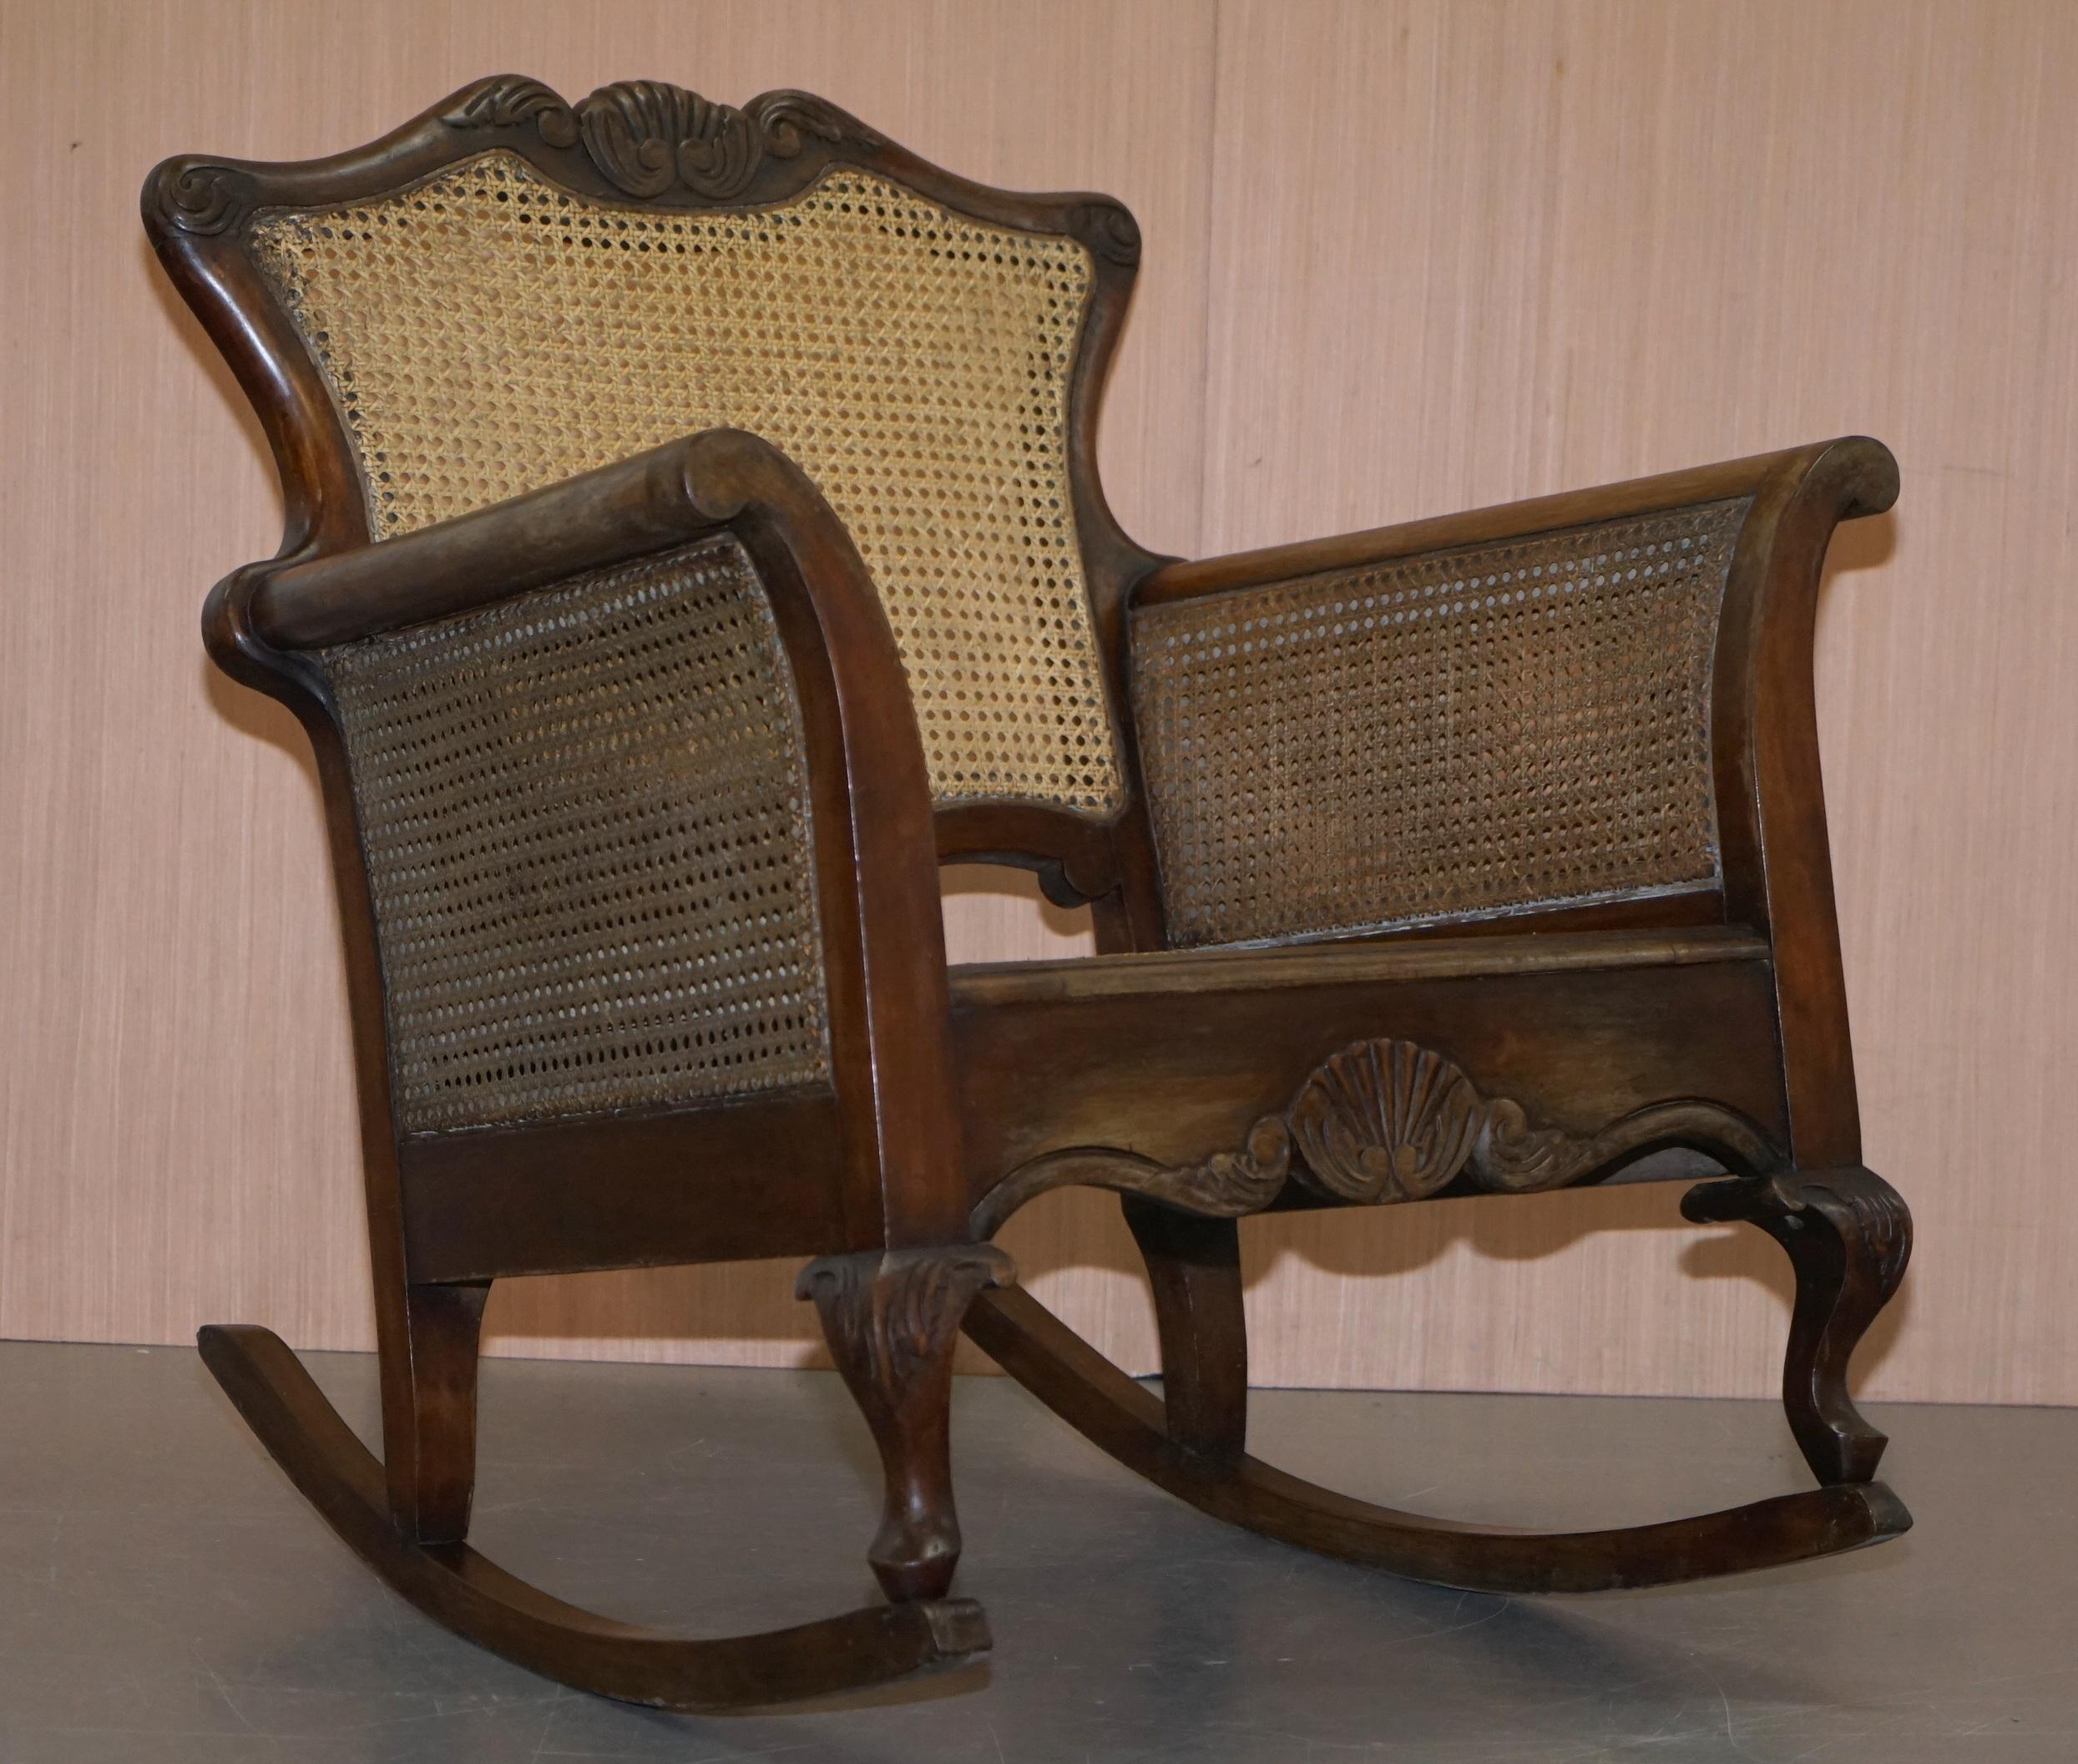 We are delighted to offer for sale this very rare pair of Italian circa 1920s Berger rocking armchairs with hand carved hardwood frames

A very good looking and exceptionally comfortable pair of rocking chairs. I have never seen another like